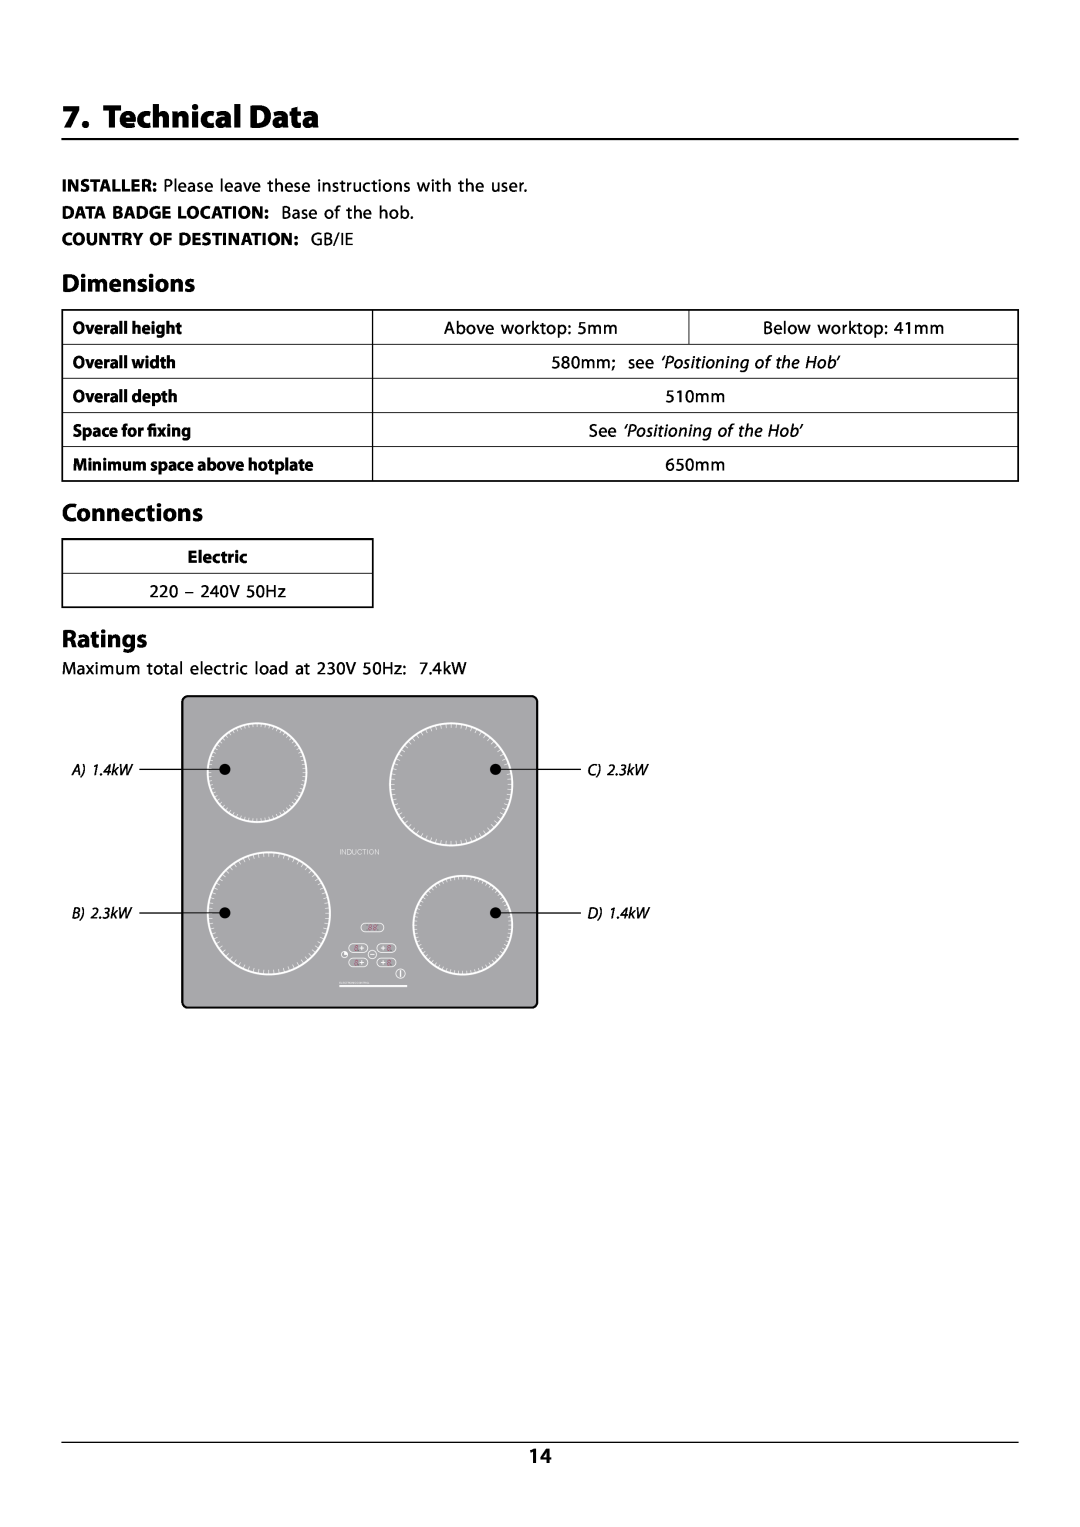 Rangemaster RI60 manual Technical Data, Dimensions, Connections, Ratings, see ‘Positioning of the Hob’, Induction 